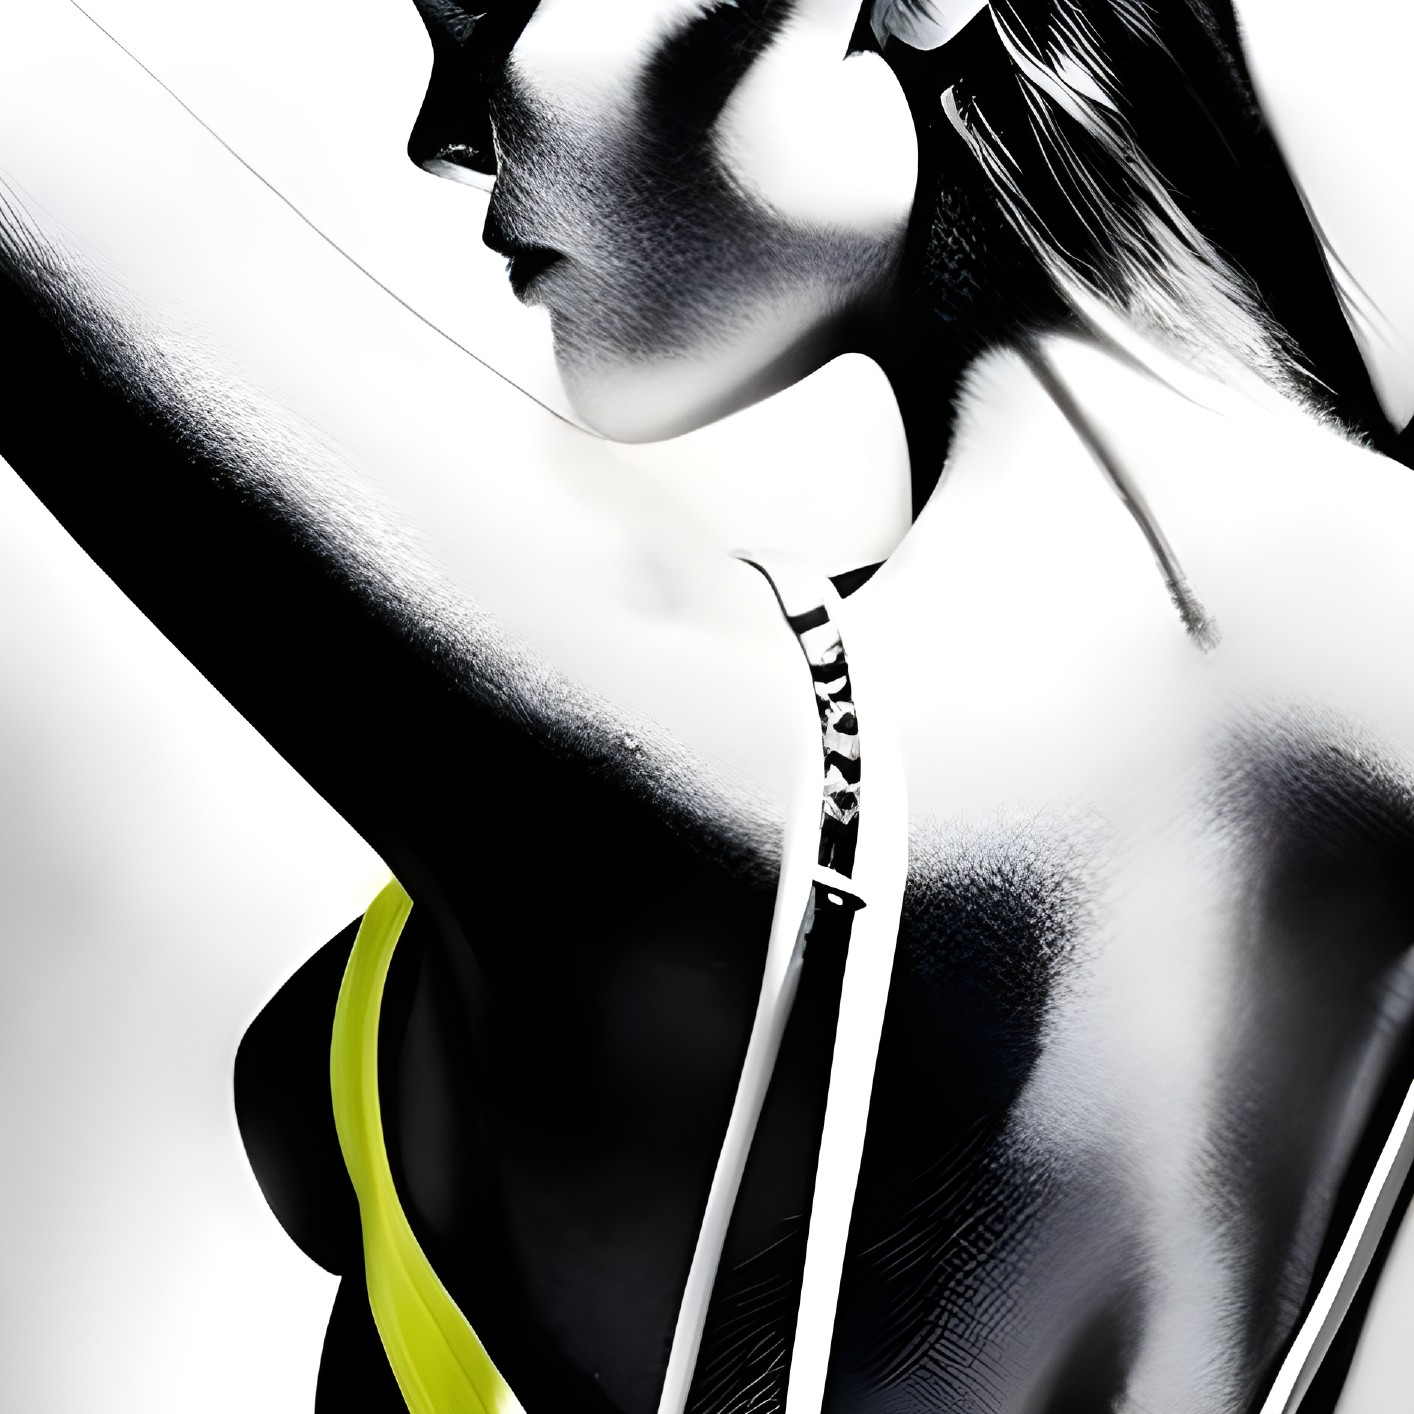 Monochrome abstract art: stylized female figure in black, white, and yellow.